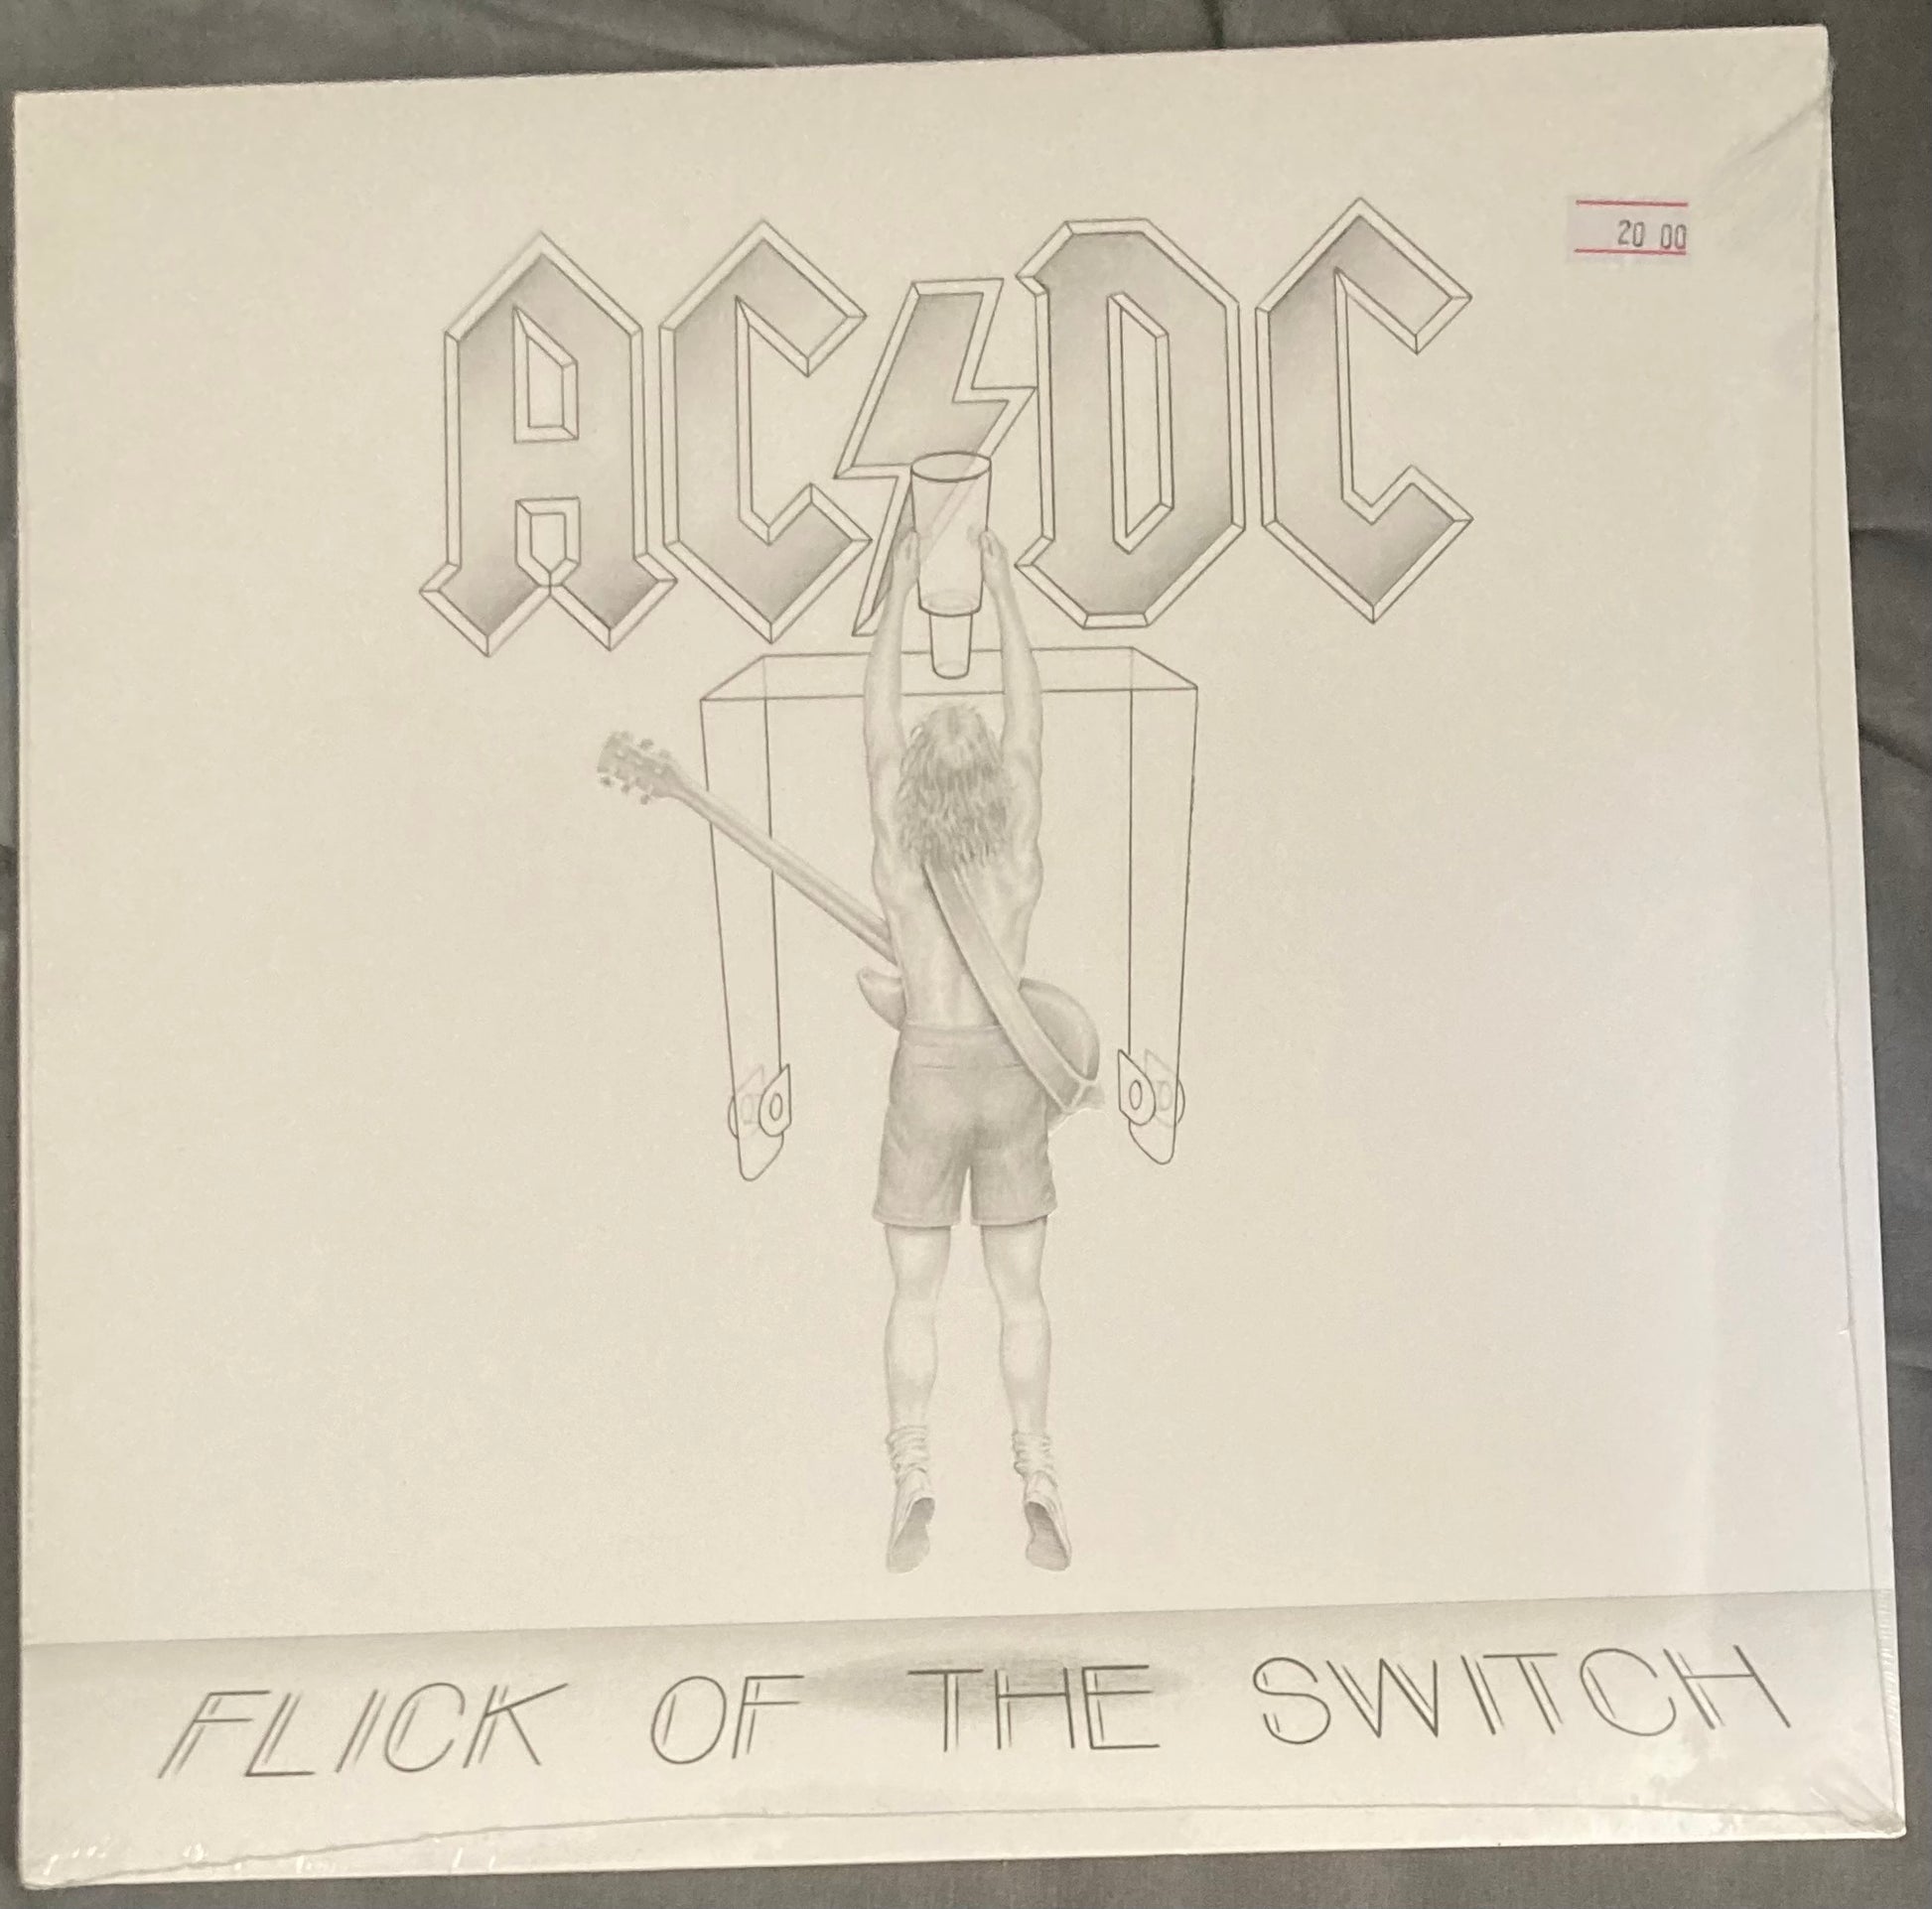 The front of 'AC/DC - Flick of the Switch' on vinyl